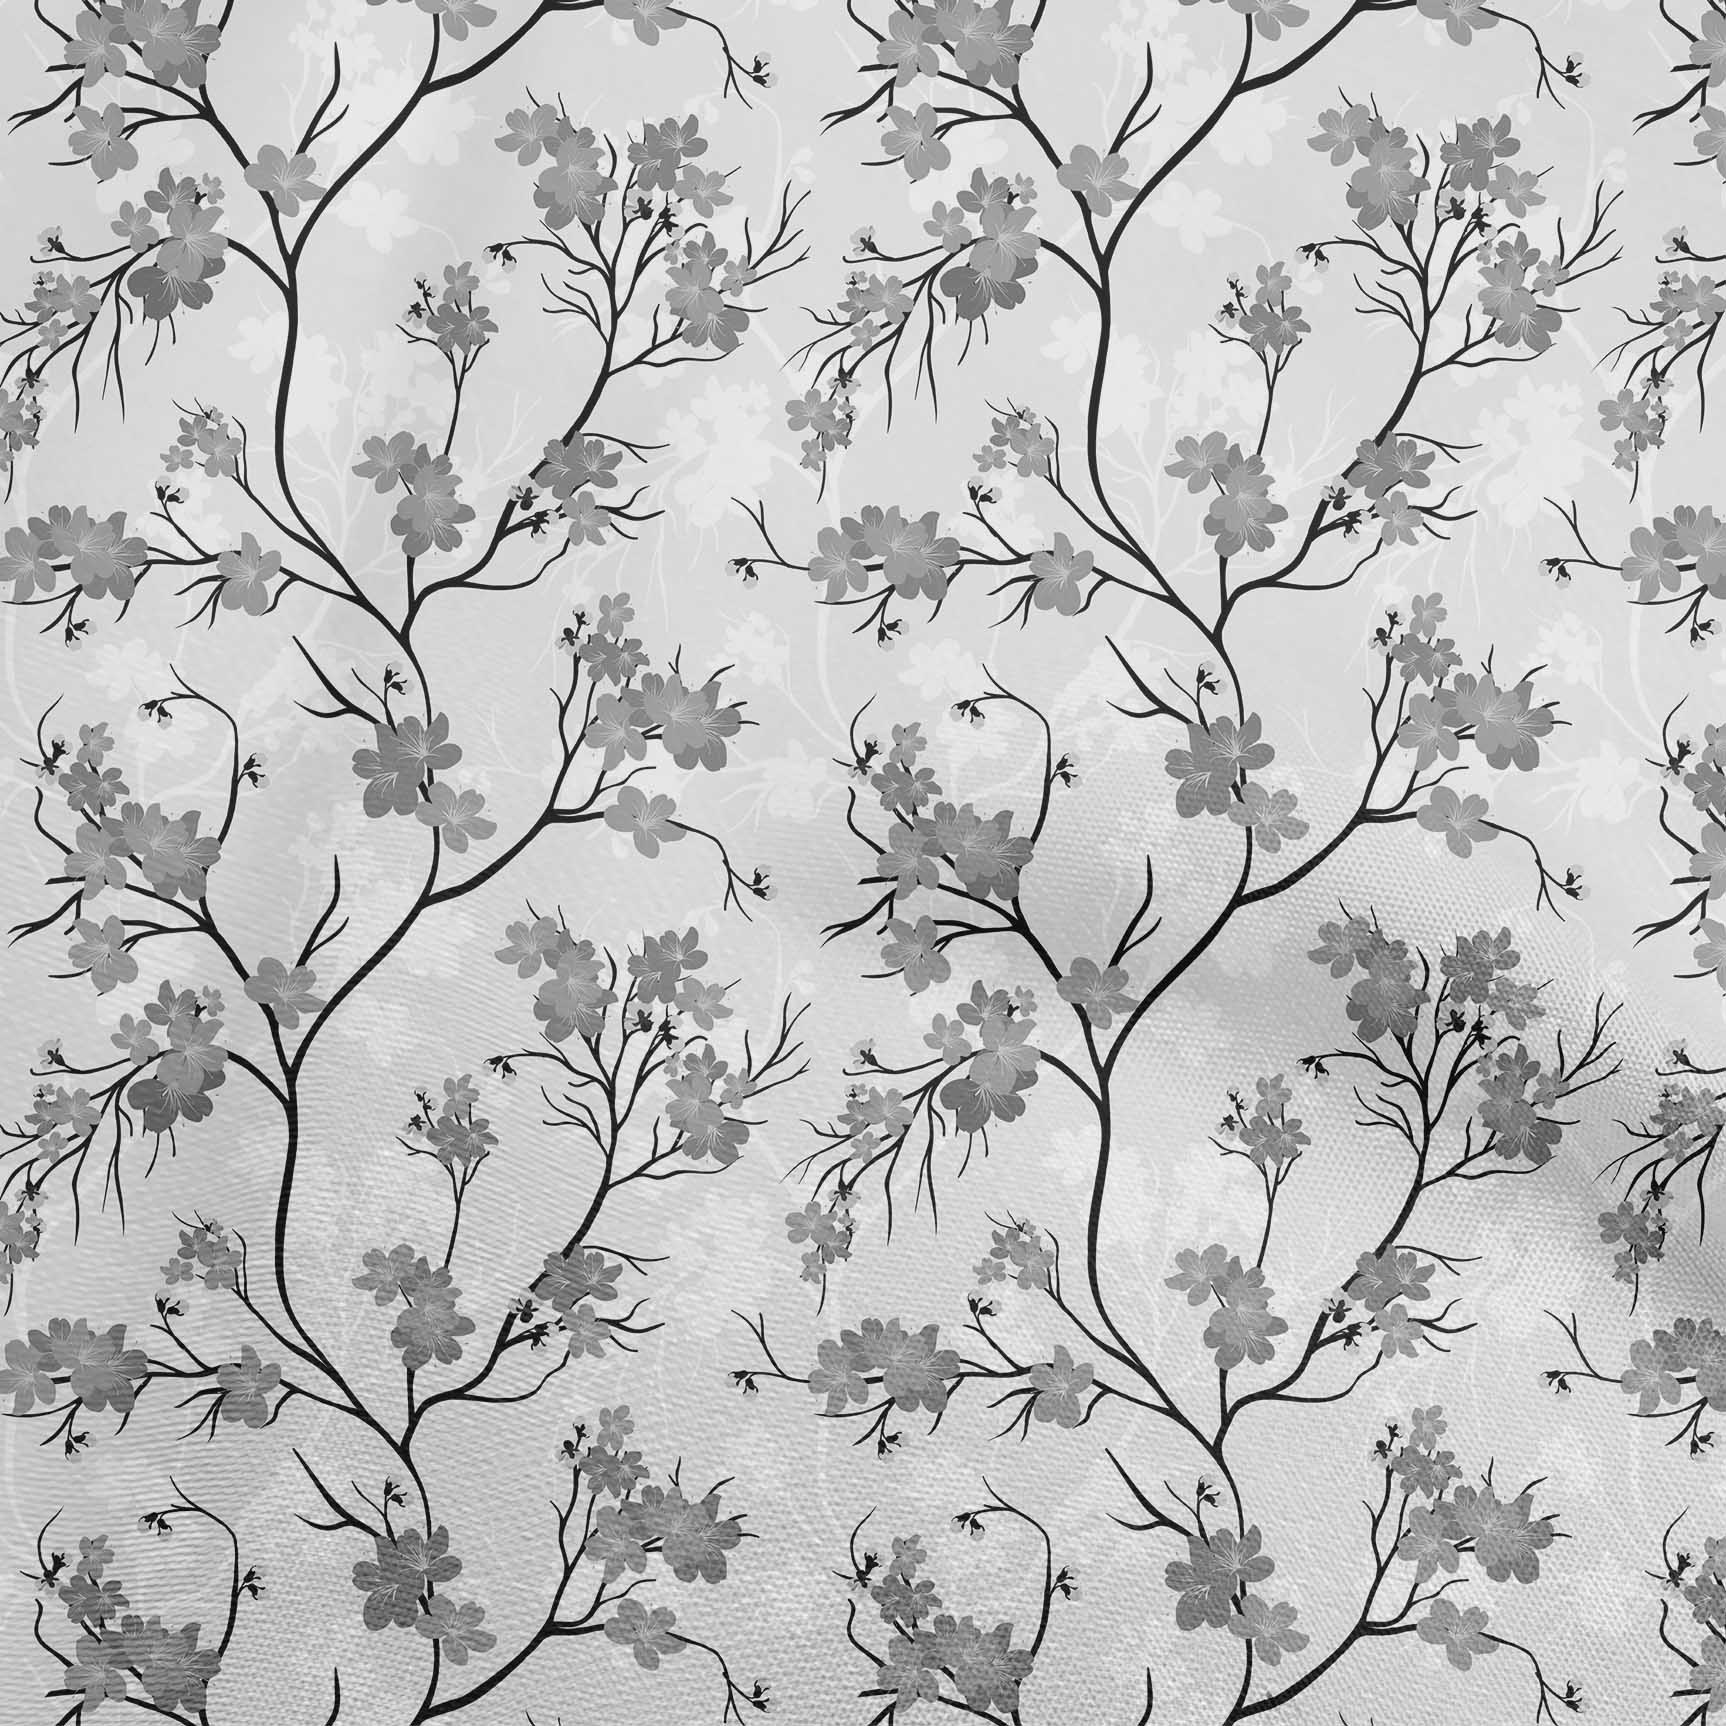 oneOone Polyester Spandex Gray Fabric Floral Sewing Material Print Fabric By The Yard 56 Inch Wide - image 1 of 5